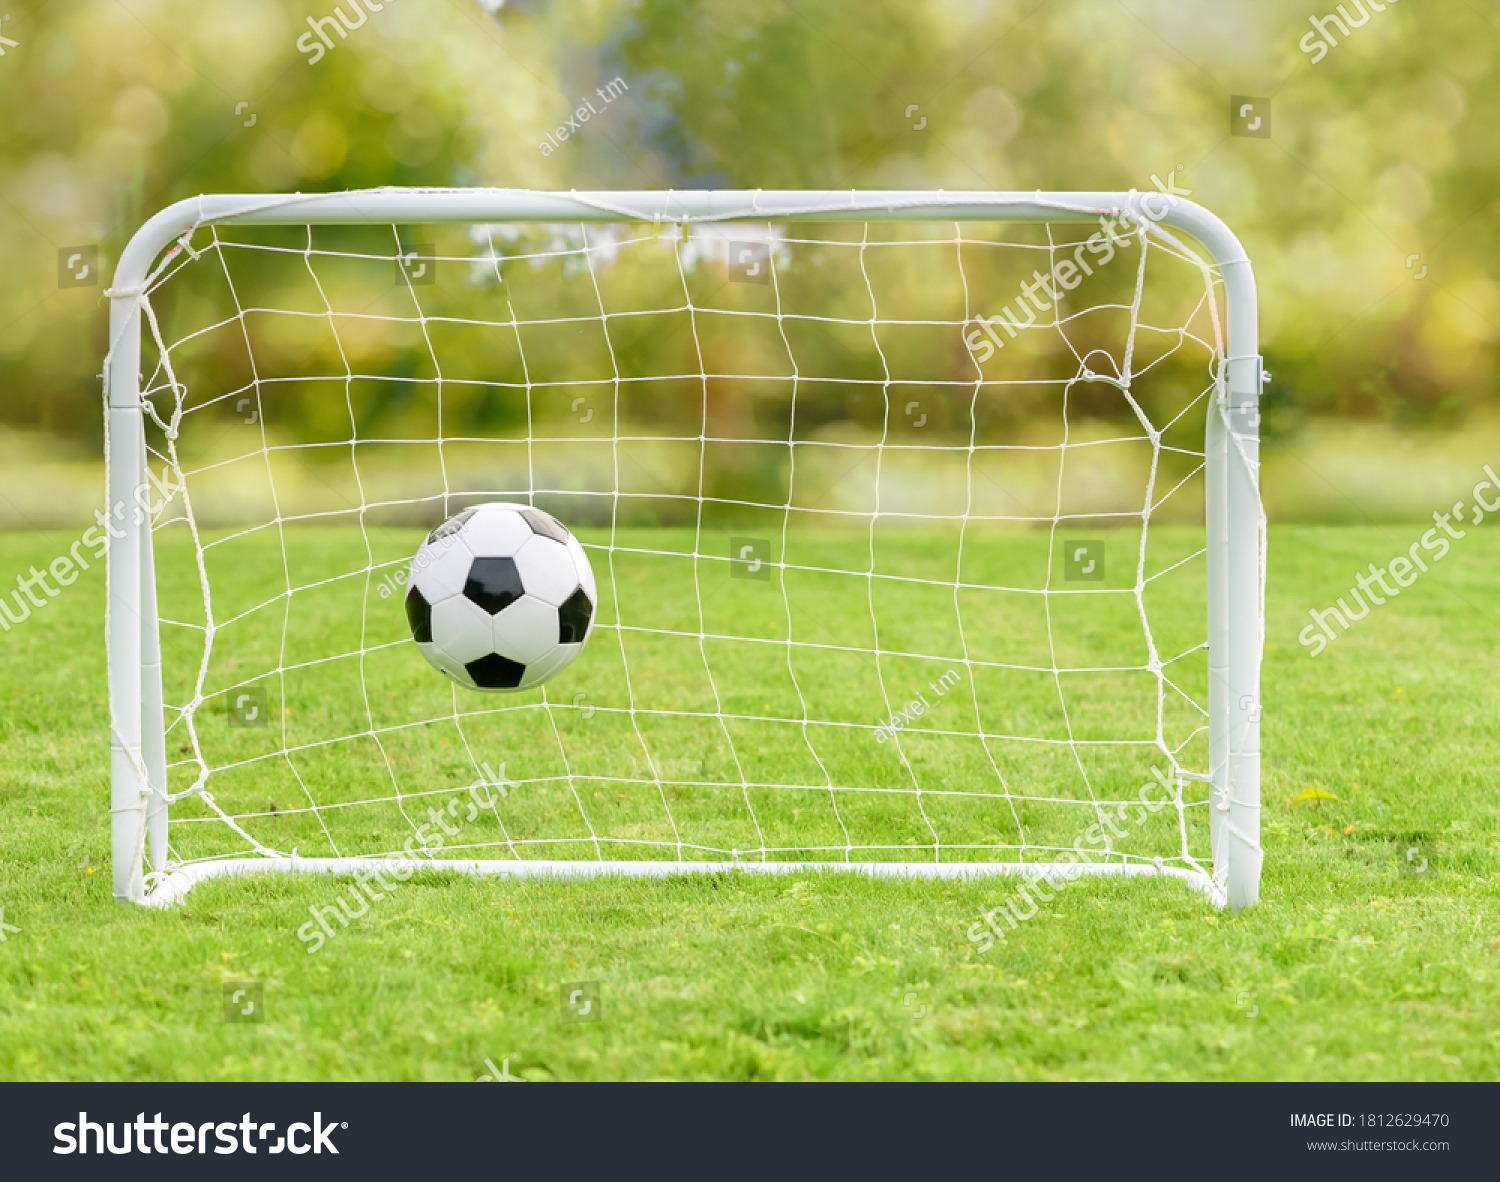 Generic football (soccer) ball hits net of mini goal as concept of recreational sport and family fun #1812629470